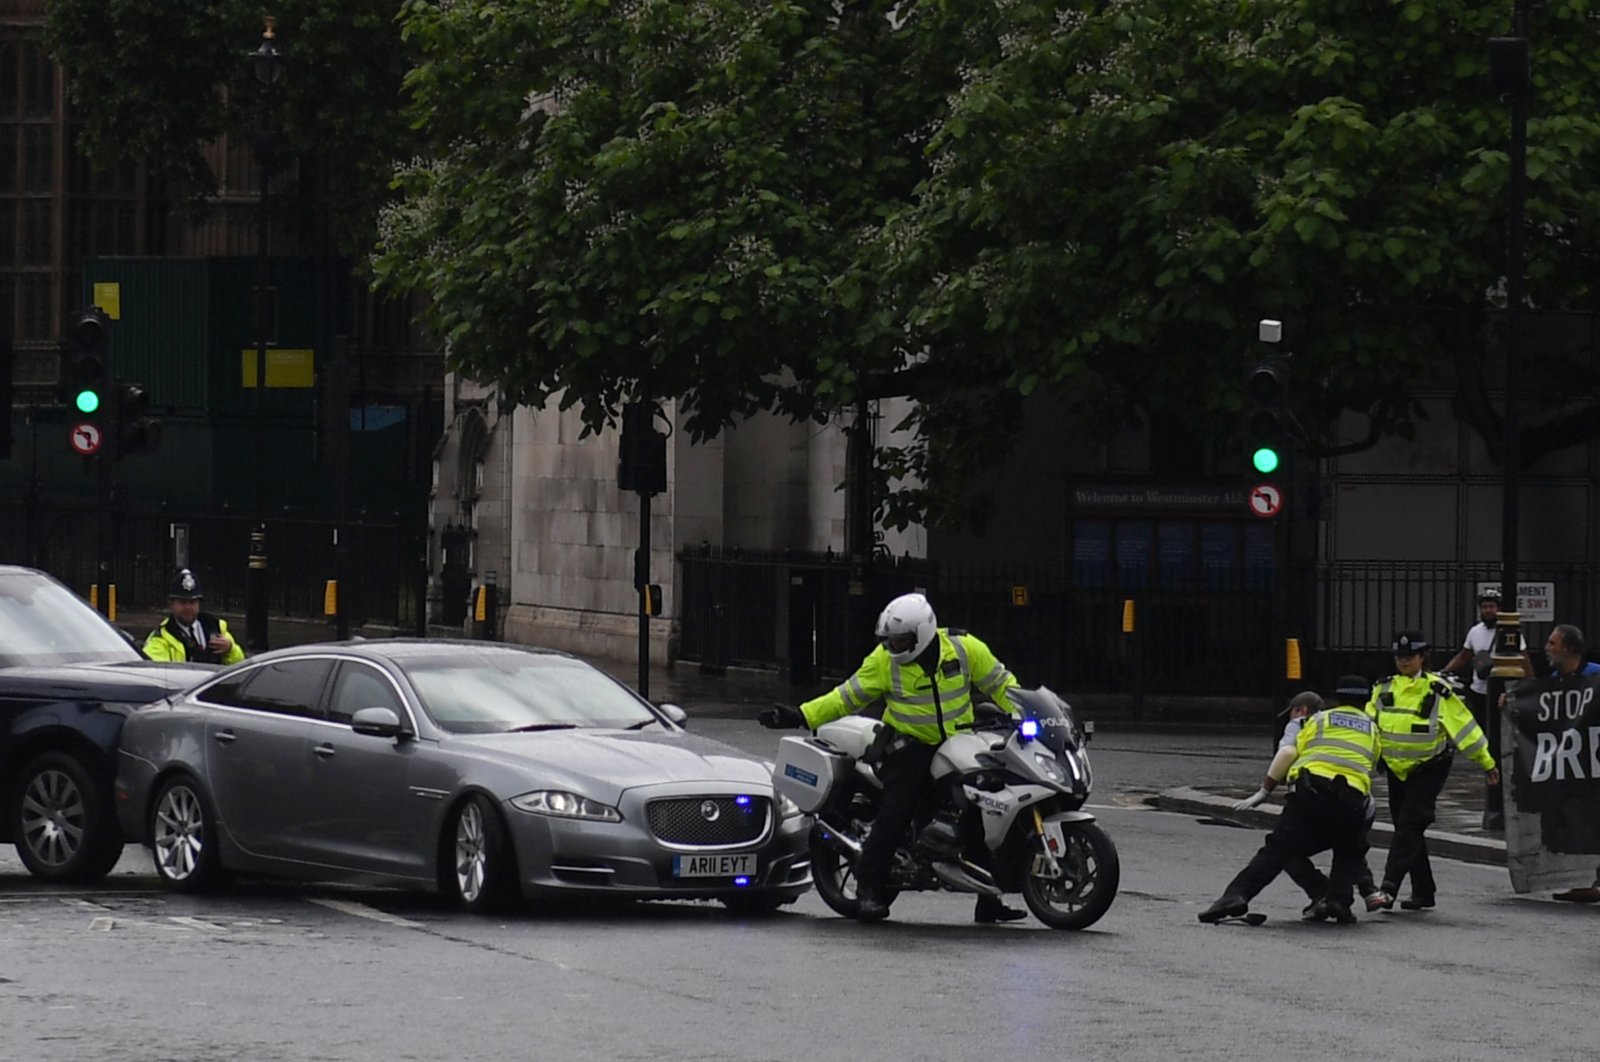 A protester from a demonstration is stopped and detained by police officers as he ran towards the car of Britain's Prime Minister Boris Johnson (C) as it was leaving with a police escort from the Houses of Parliament, London, June 17, 2020. (AFP Photo)